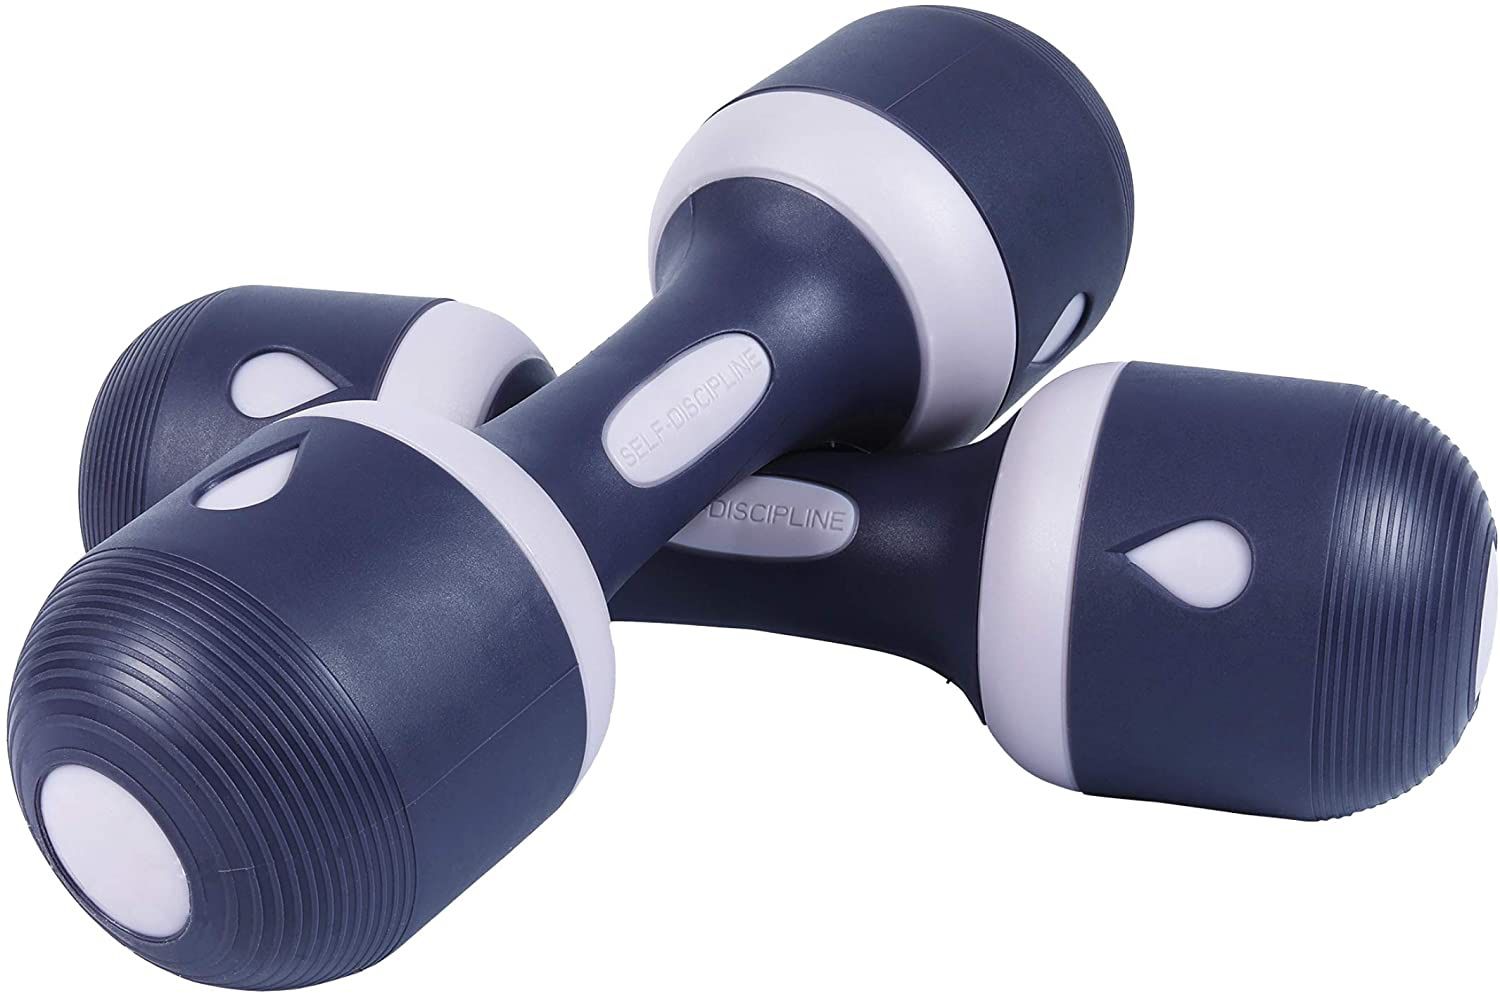 Nice C Adjustable Dumbbell Weight Pair, 5-in-1 Weight Options, Non-Slip Neoprene Hand, All-Purpose, Home, Gym, Office 5 Lbs pair and 11 Lbs pair